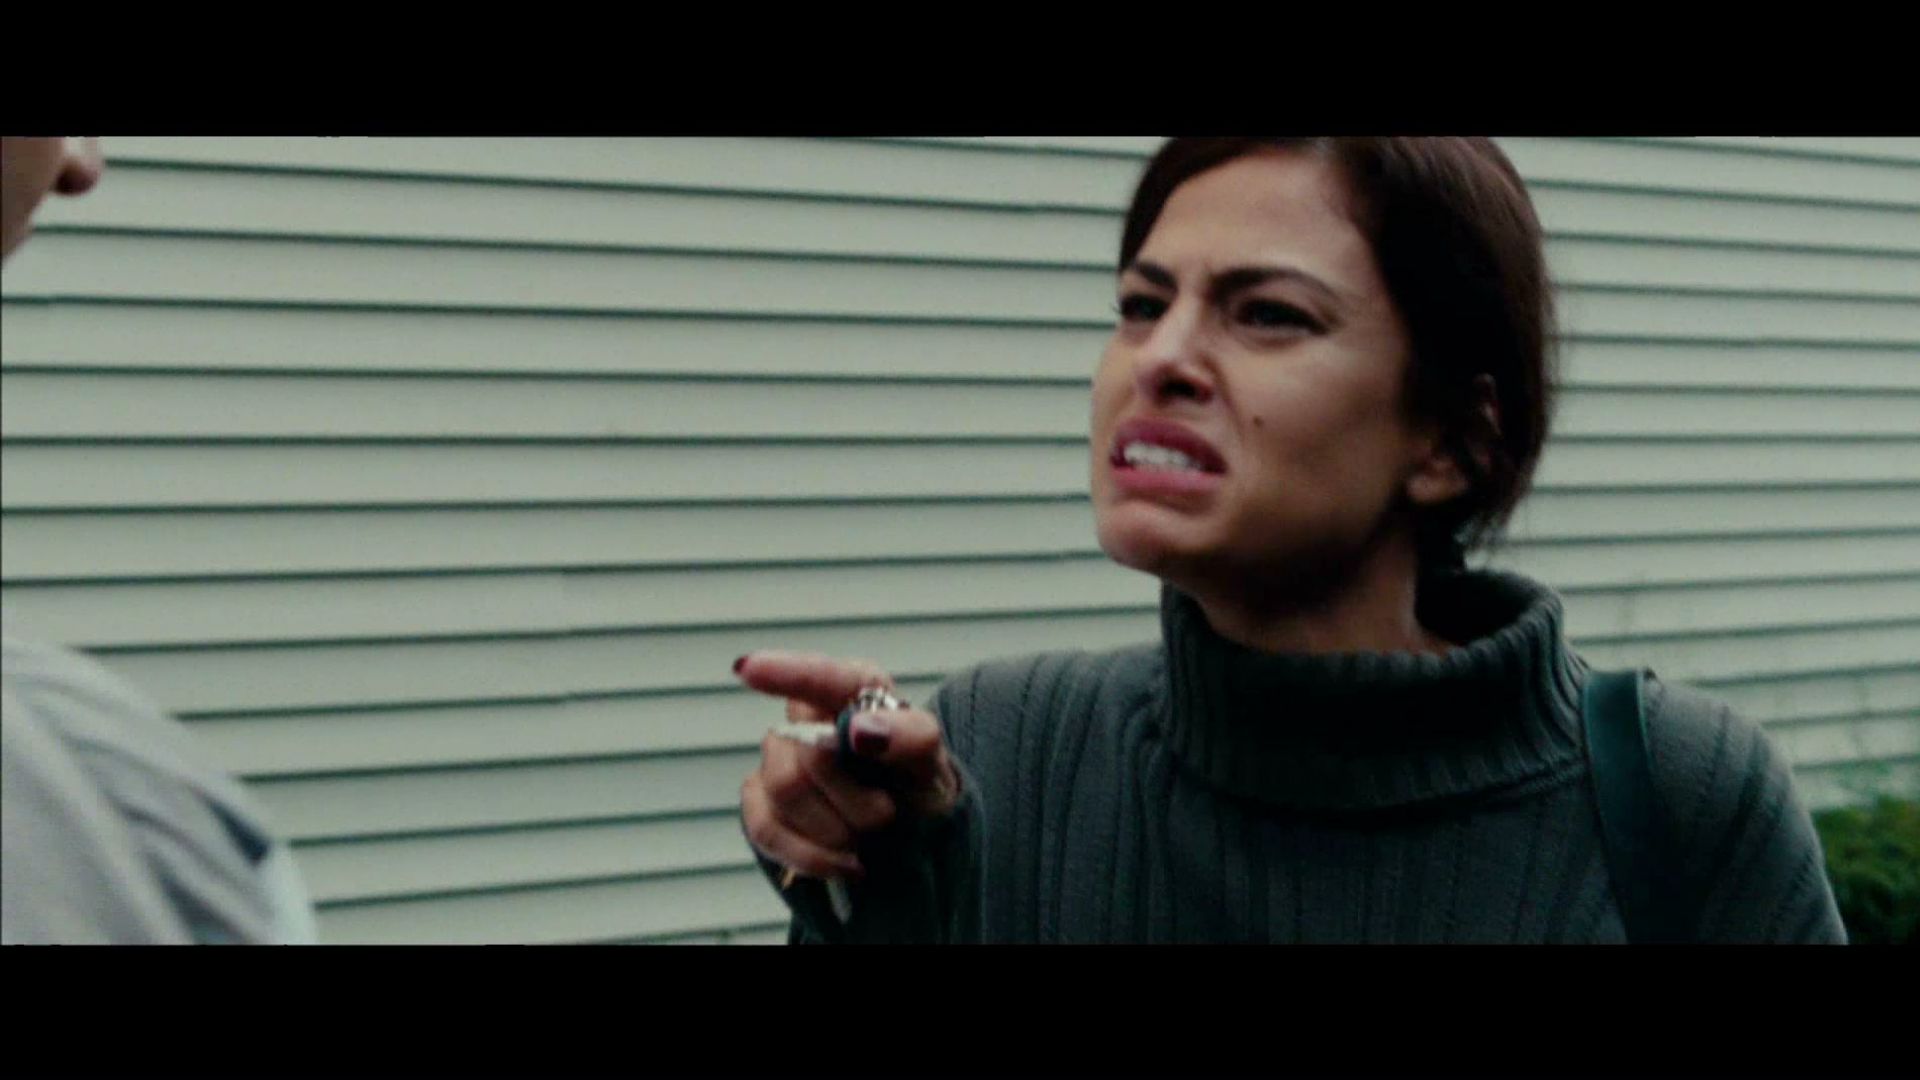 Bradley Cooper makes Eva Mendes cry in The Place Beyond the Pines